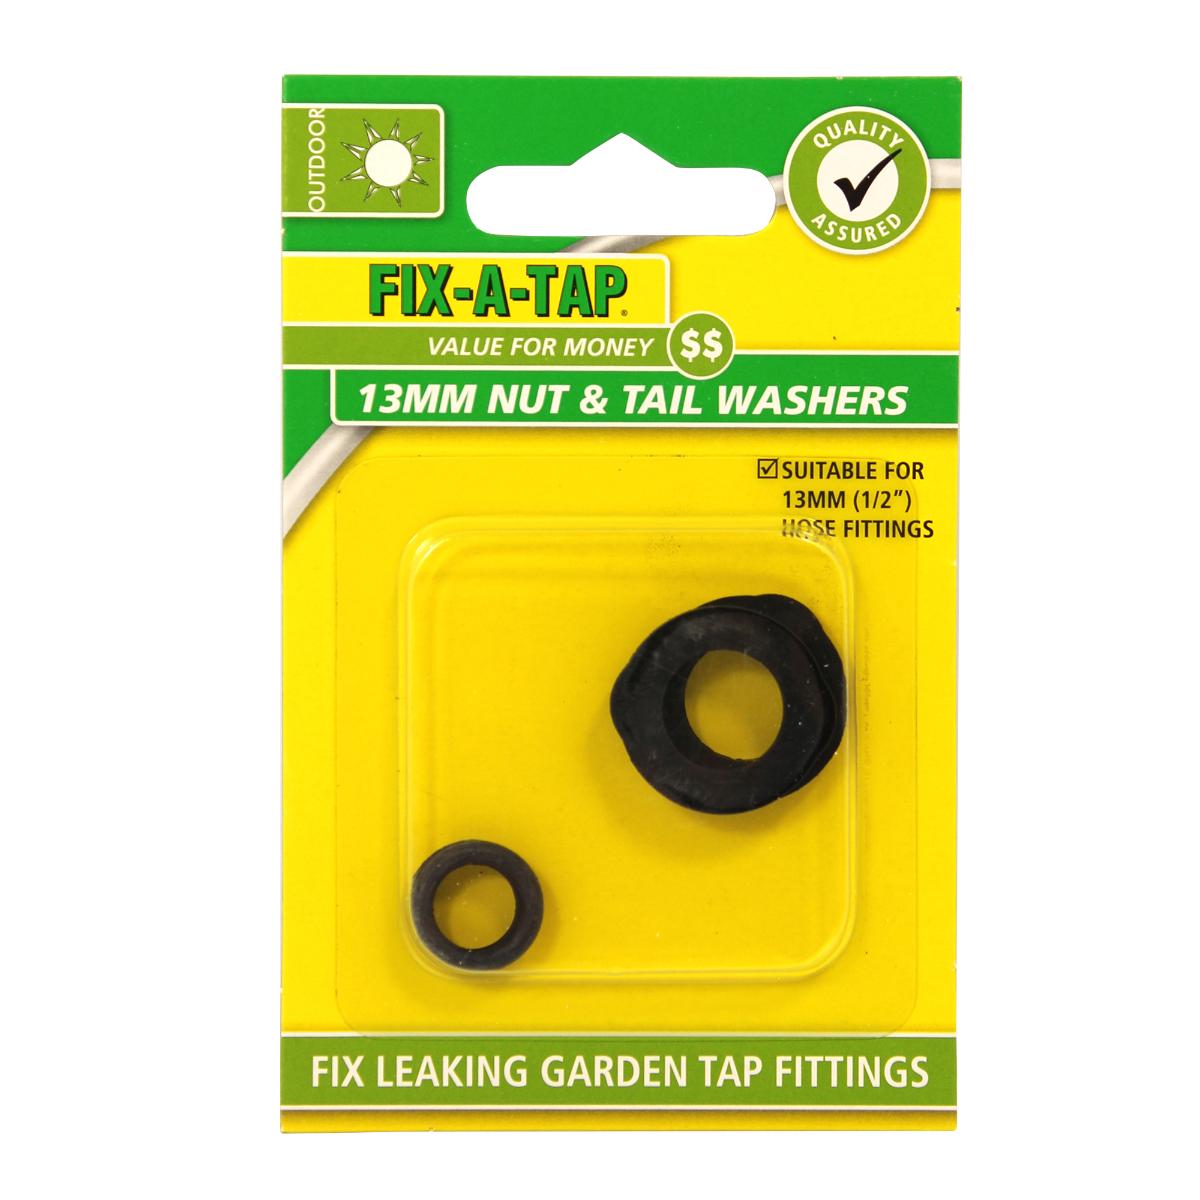 NUT & TAIL WASHERS 13MM 2PK